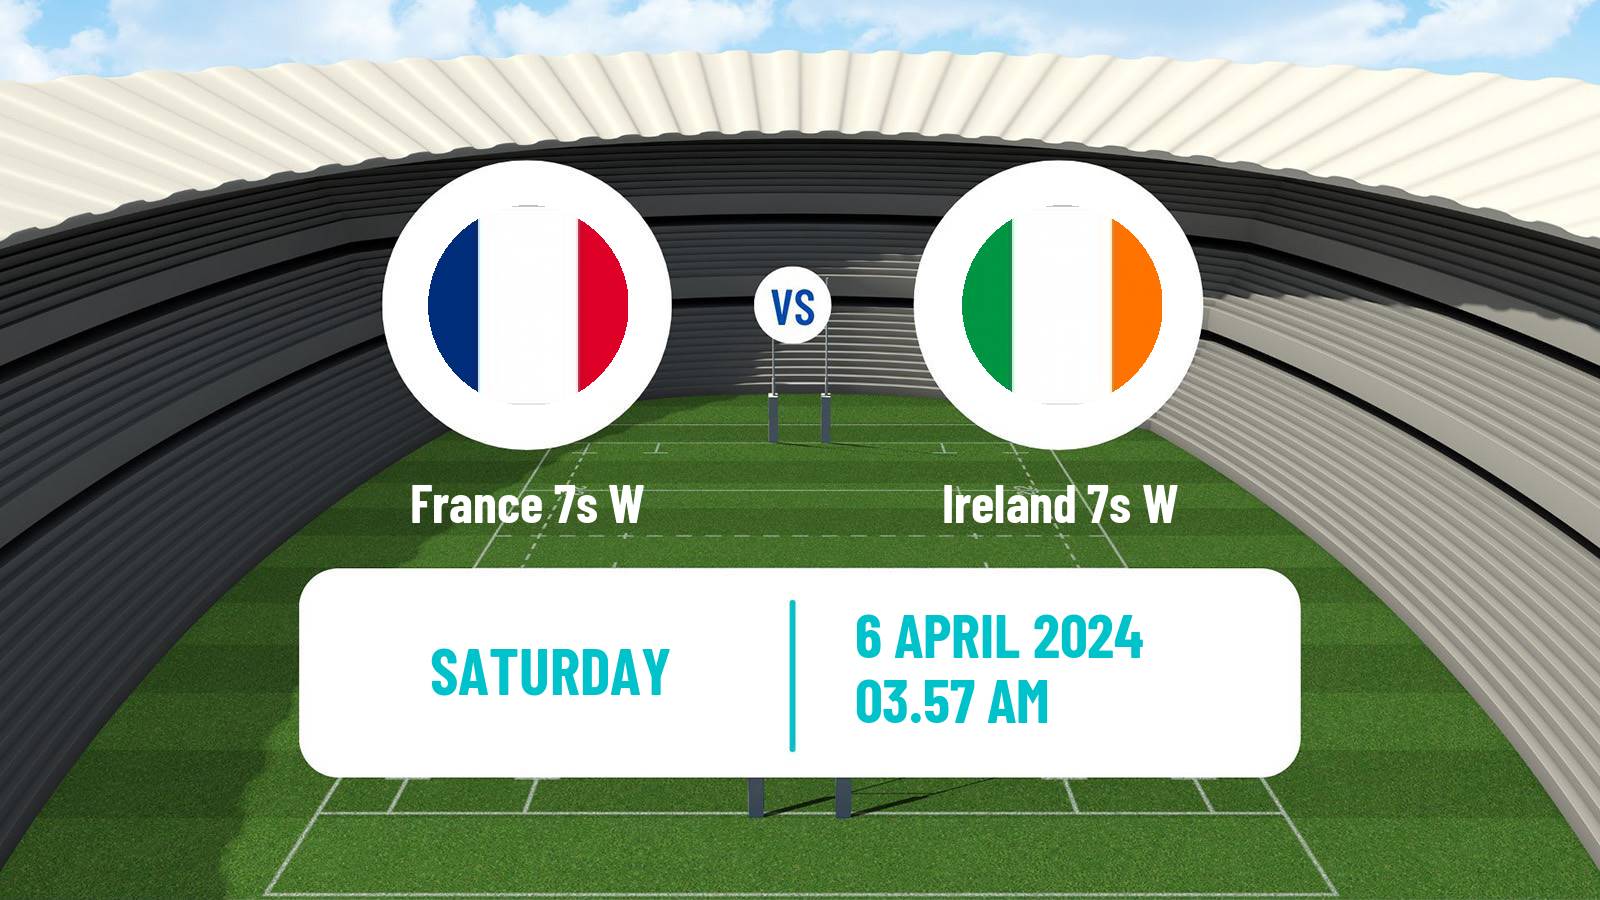 Rugby union Sevens World Series Women - Hong Kong France 7s W - Ireland 7s W